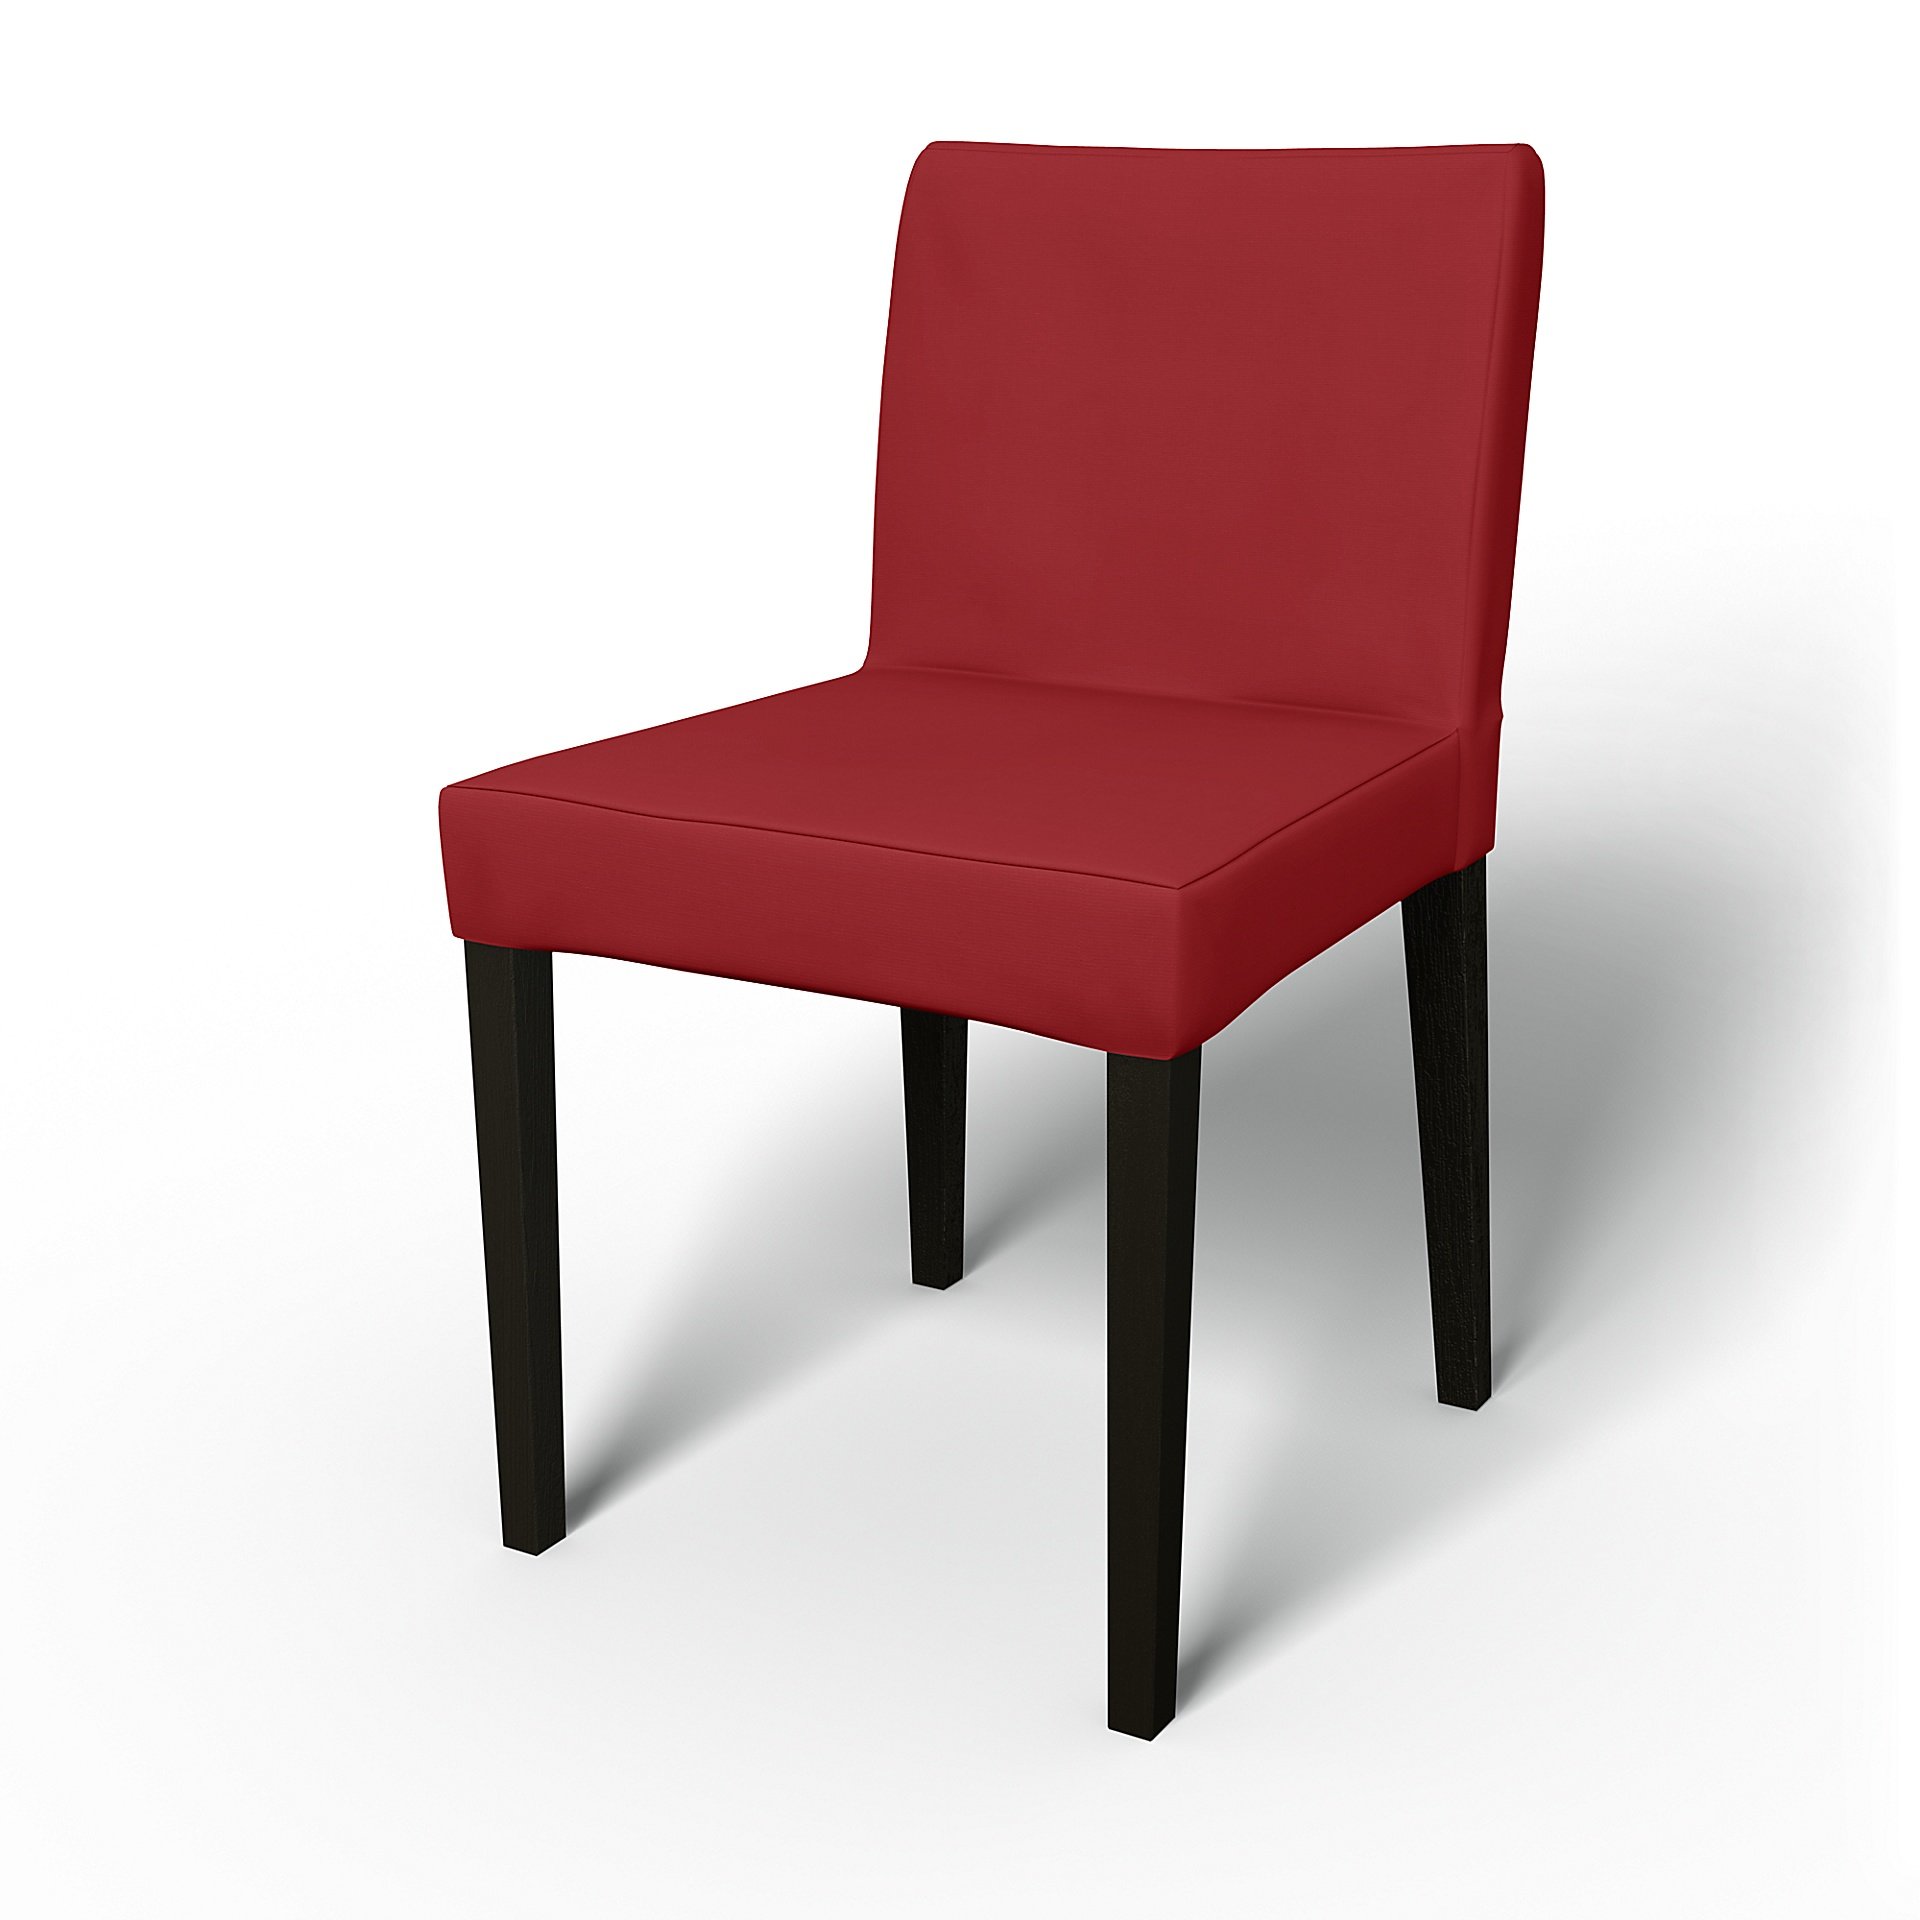 IKEA - Henrik Dining Chair Cover, Scarlet Red, Cotton - Bemz